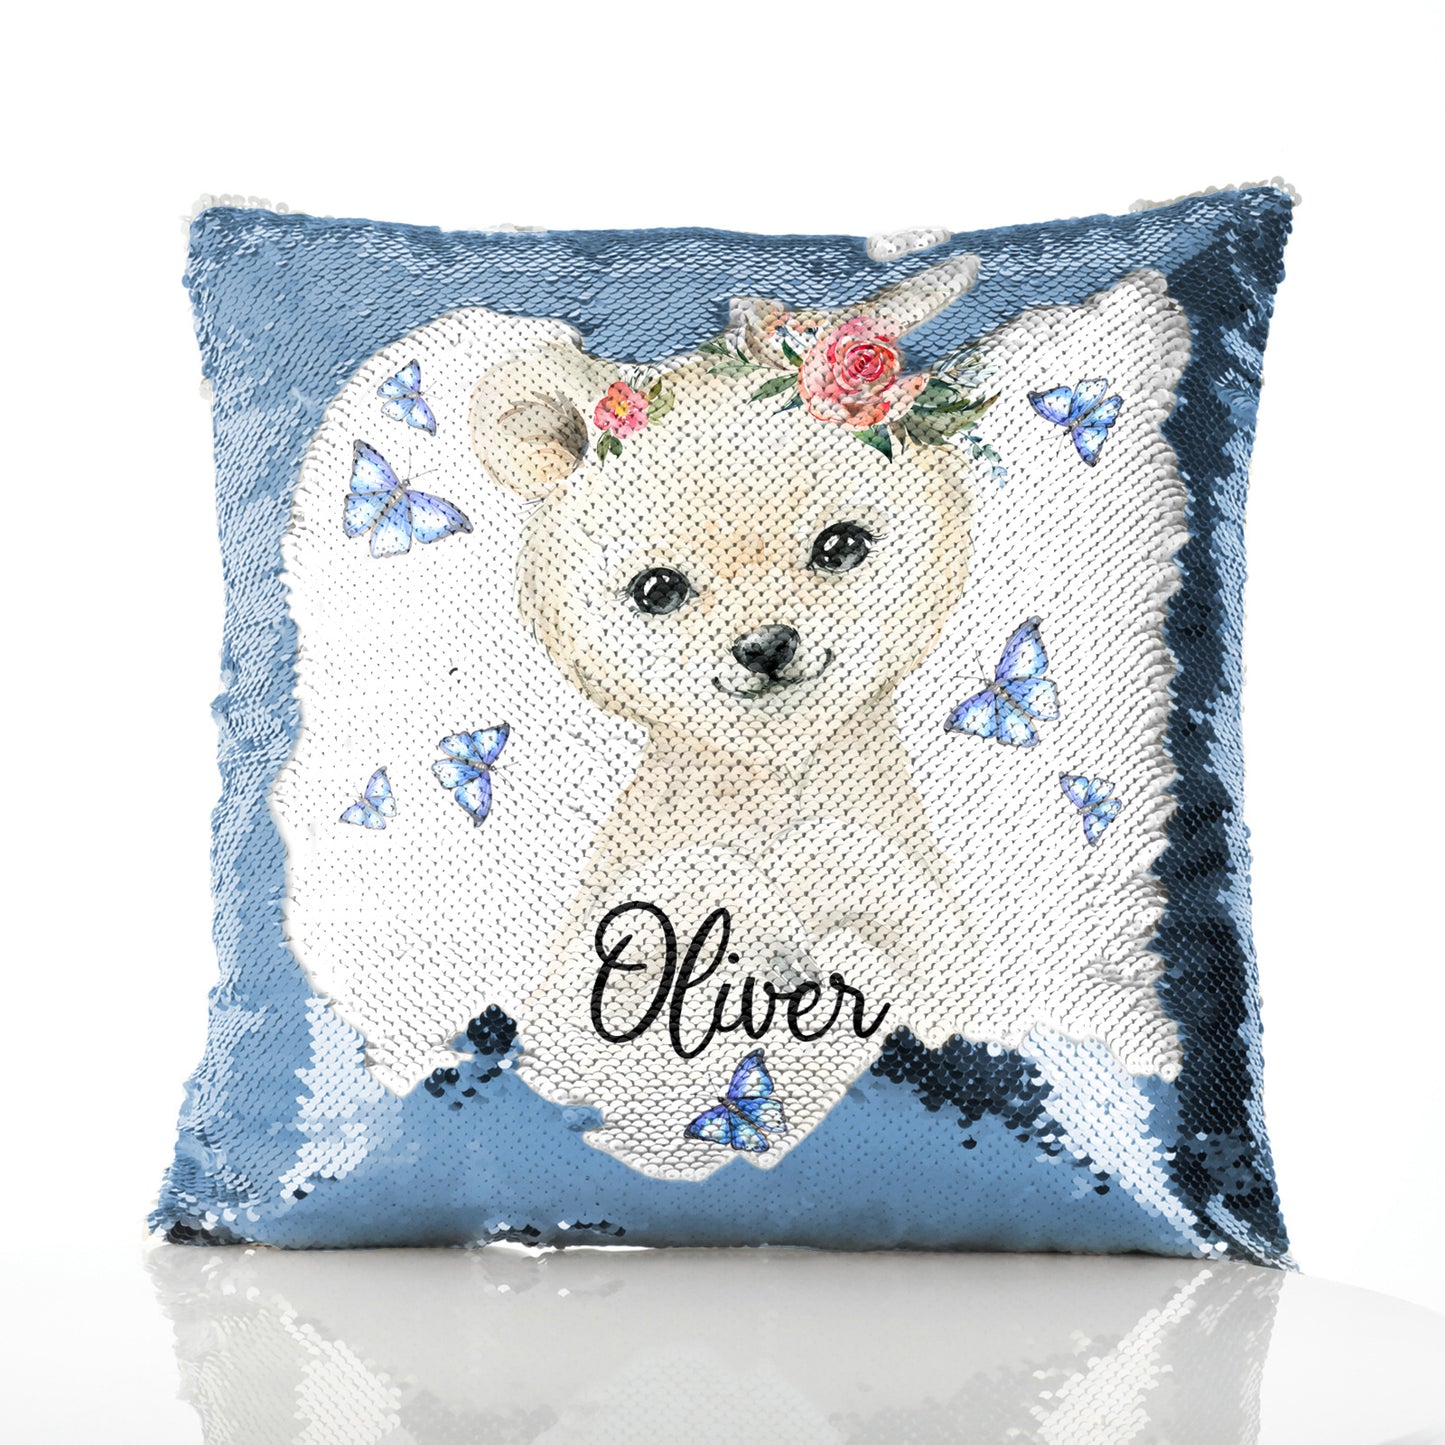 Personalised Sequin Cushion with White Polar Bear Blue Butterflies and Cute Text